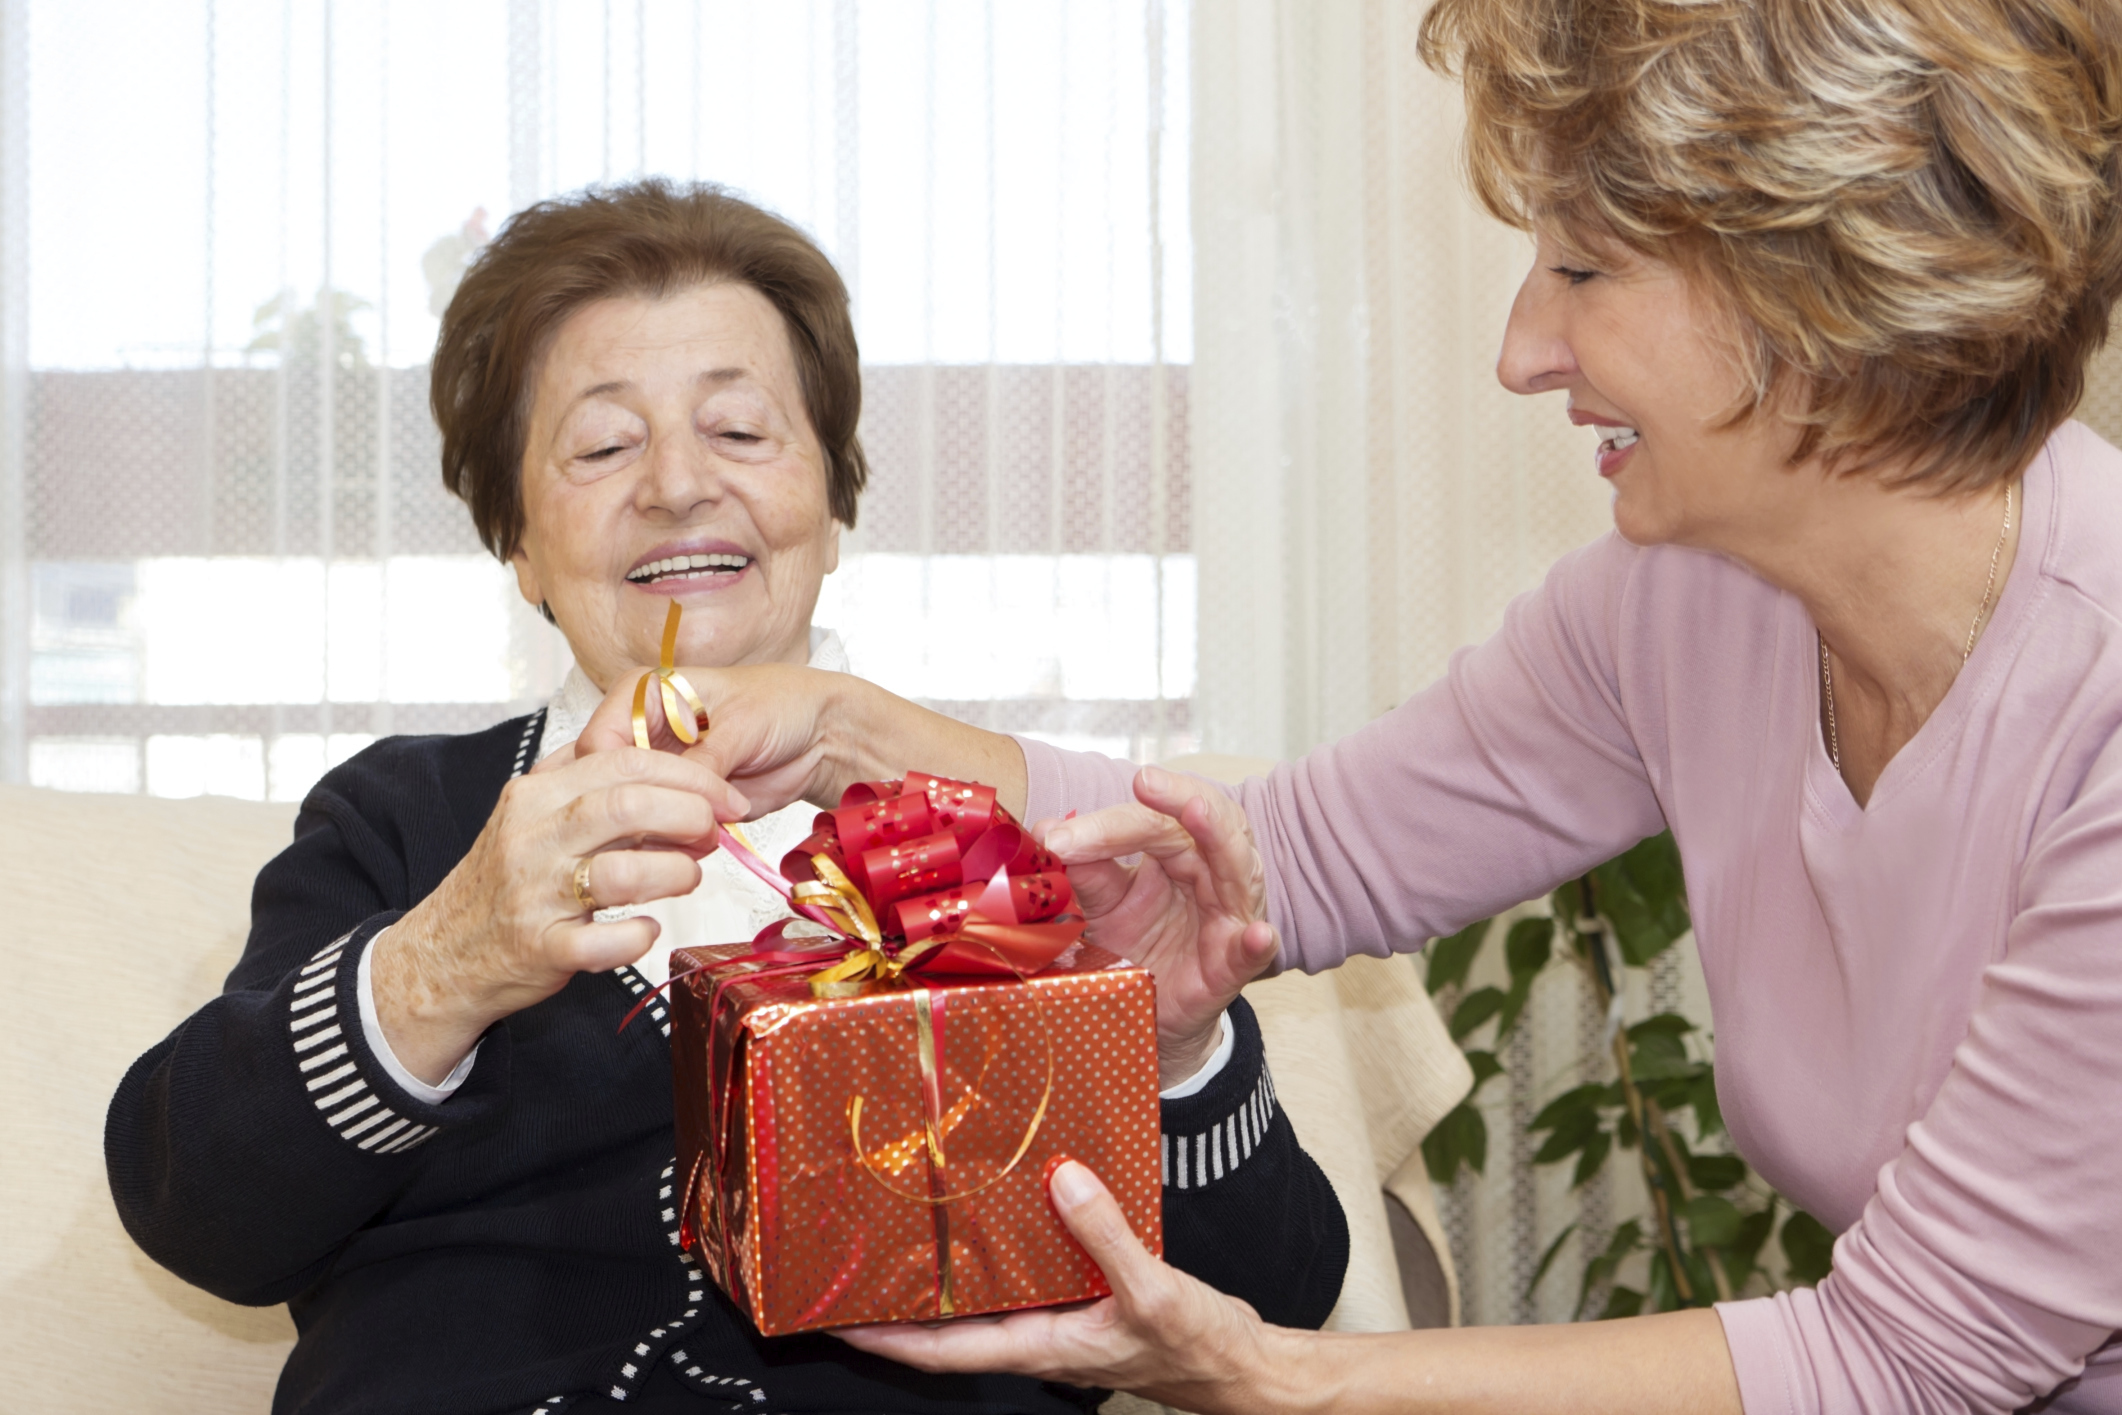 Relatives enjoy each other's company at Christmas